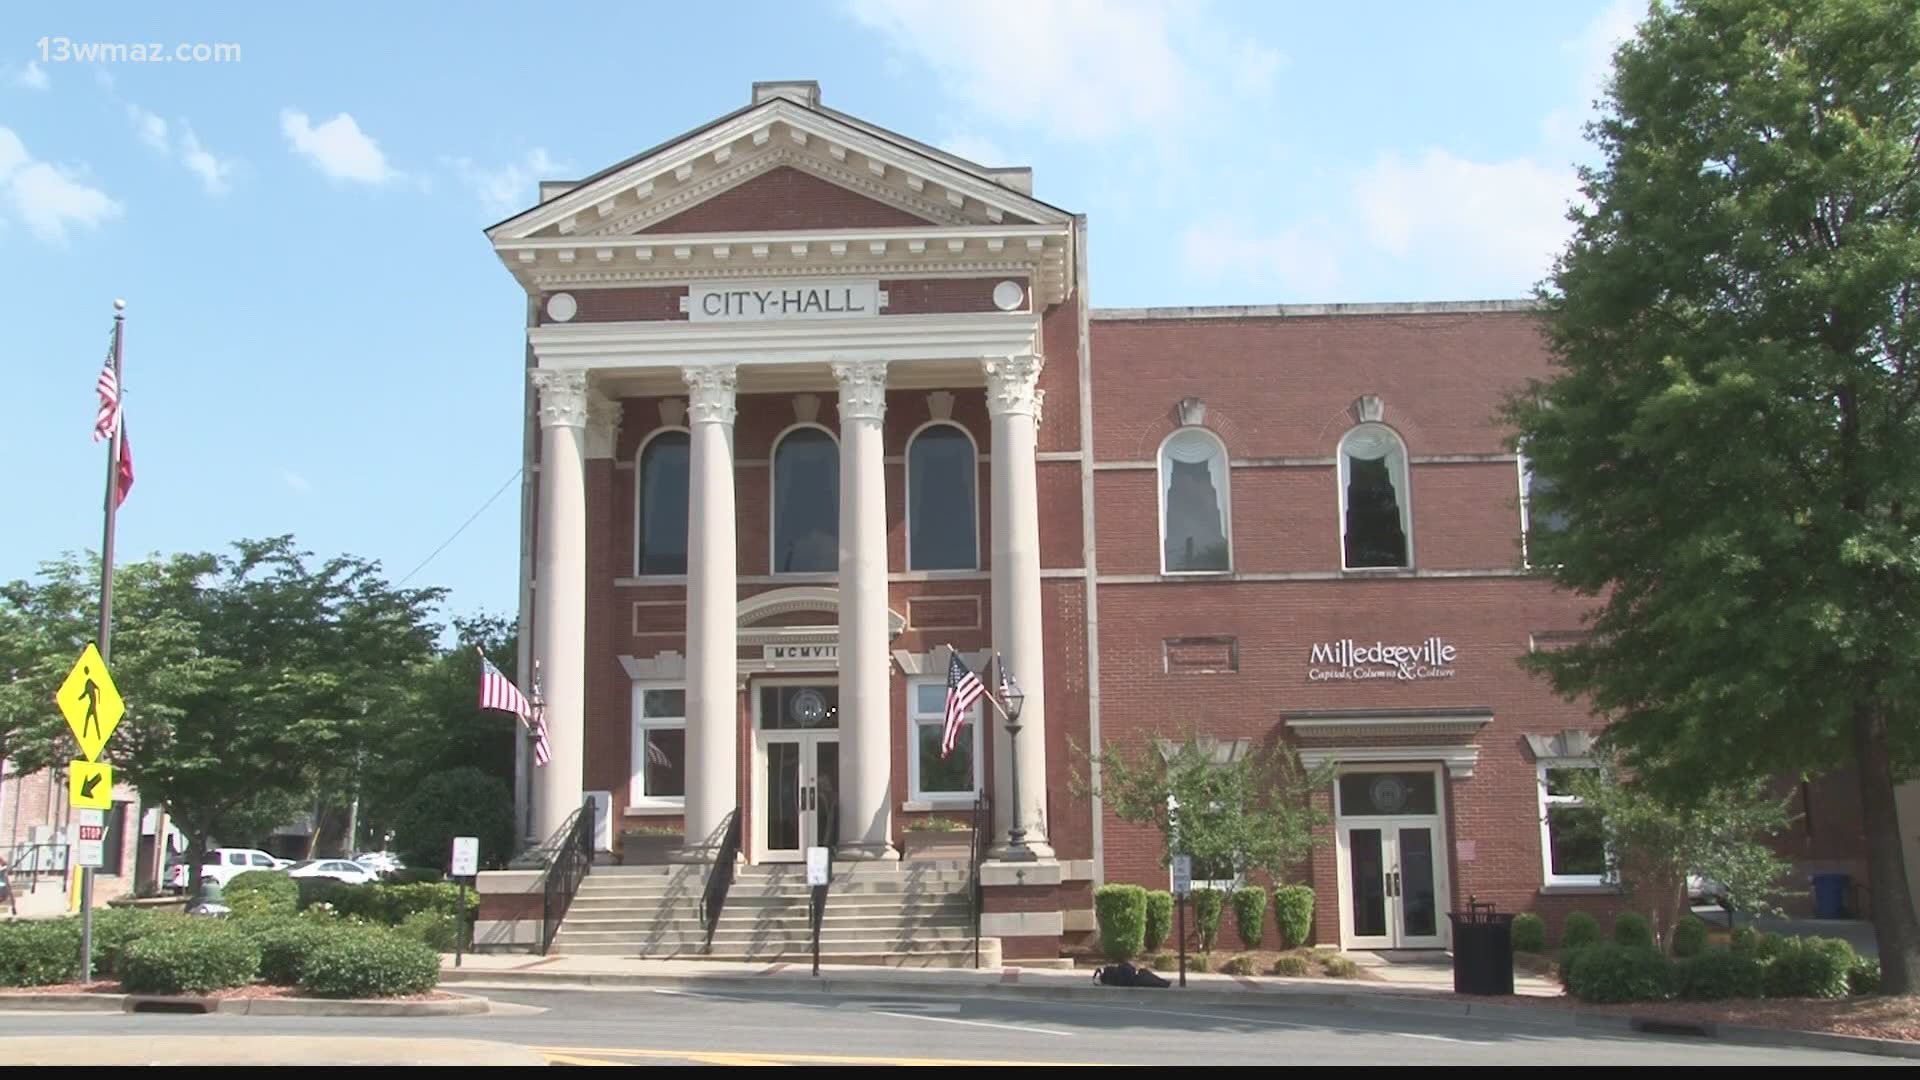 Starting on Saturday morning, the city of Milledgeville will have a new mask ordinance in place. You're expected to wear it in all public places within city limits.